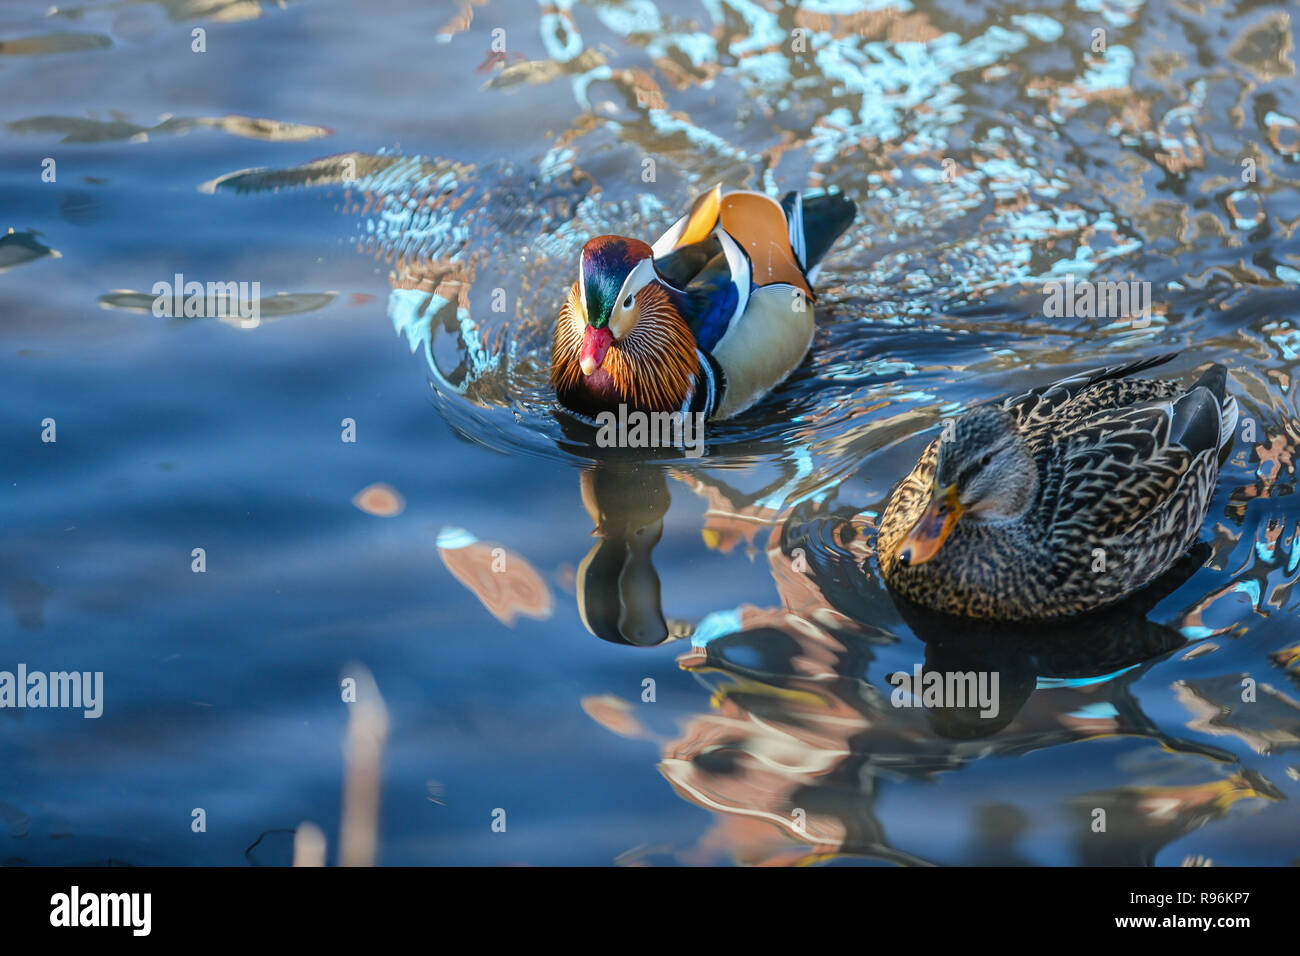 New York, New York, USA. 19th Dec, 2018. The male Mandarin duck, native to East Asia is seen in Central Park this Friday, 19th October. On October 10, the duck was first seen near the Lagoon in Central Park and a video was shared on social networks. The city's avid birdwatchers were surprised: the ducks are found in China and Japan - not the United States and nowadays have become characters of all time. Credit: William Volcov/ZUMA Wire/Alamy Live News Stock Photo